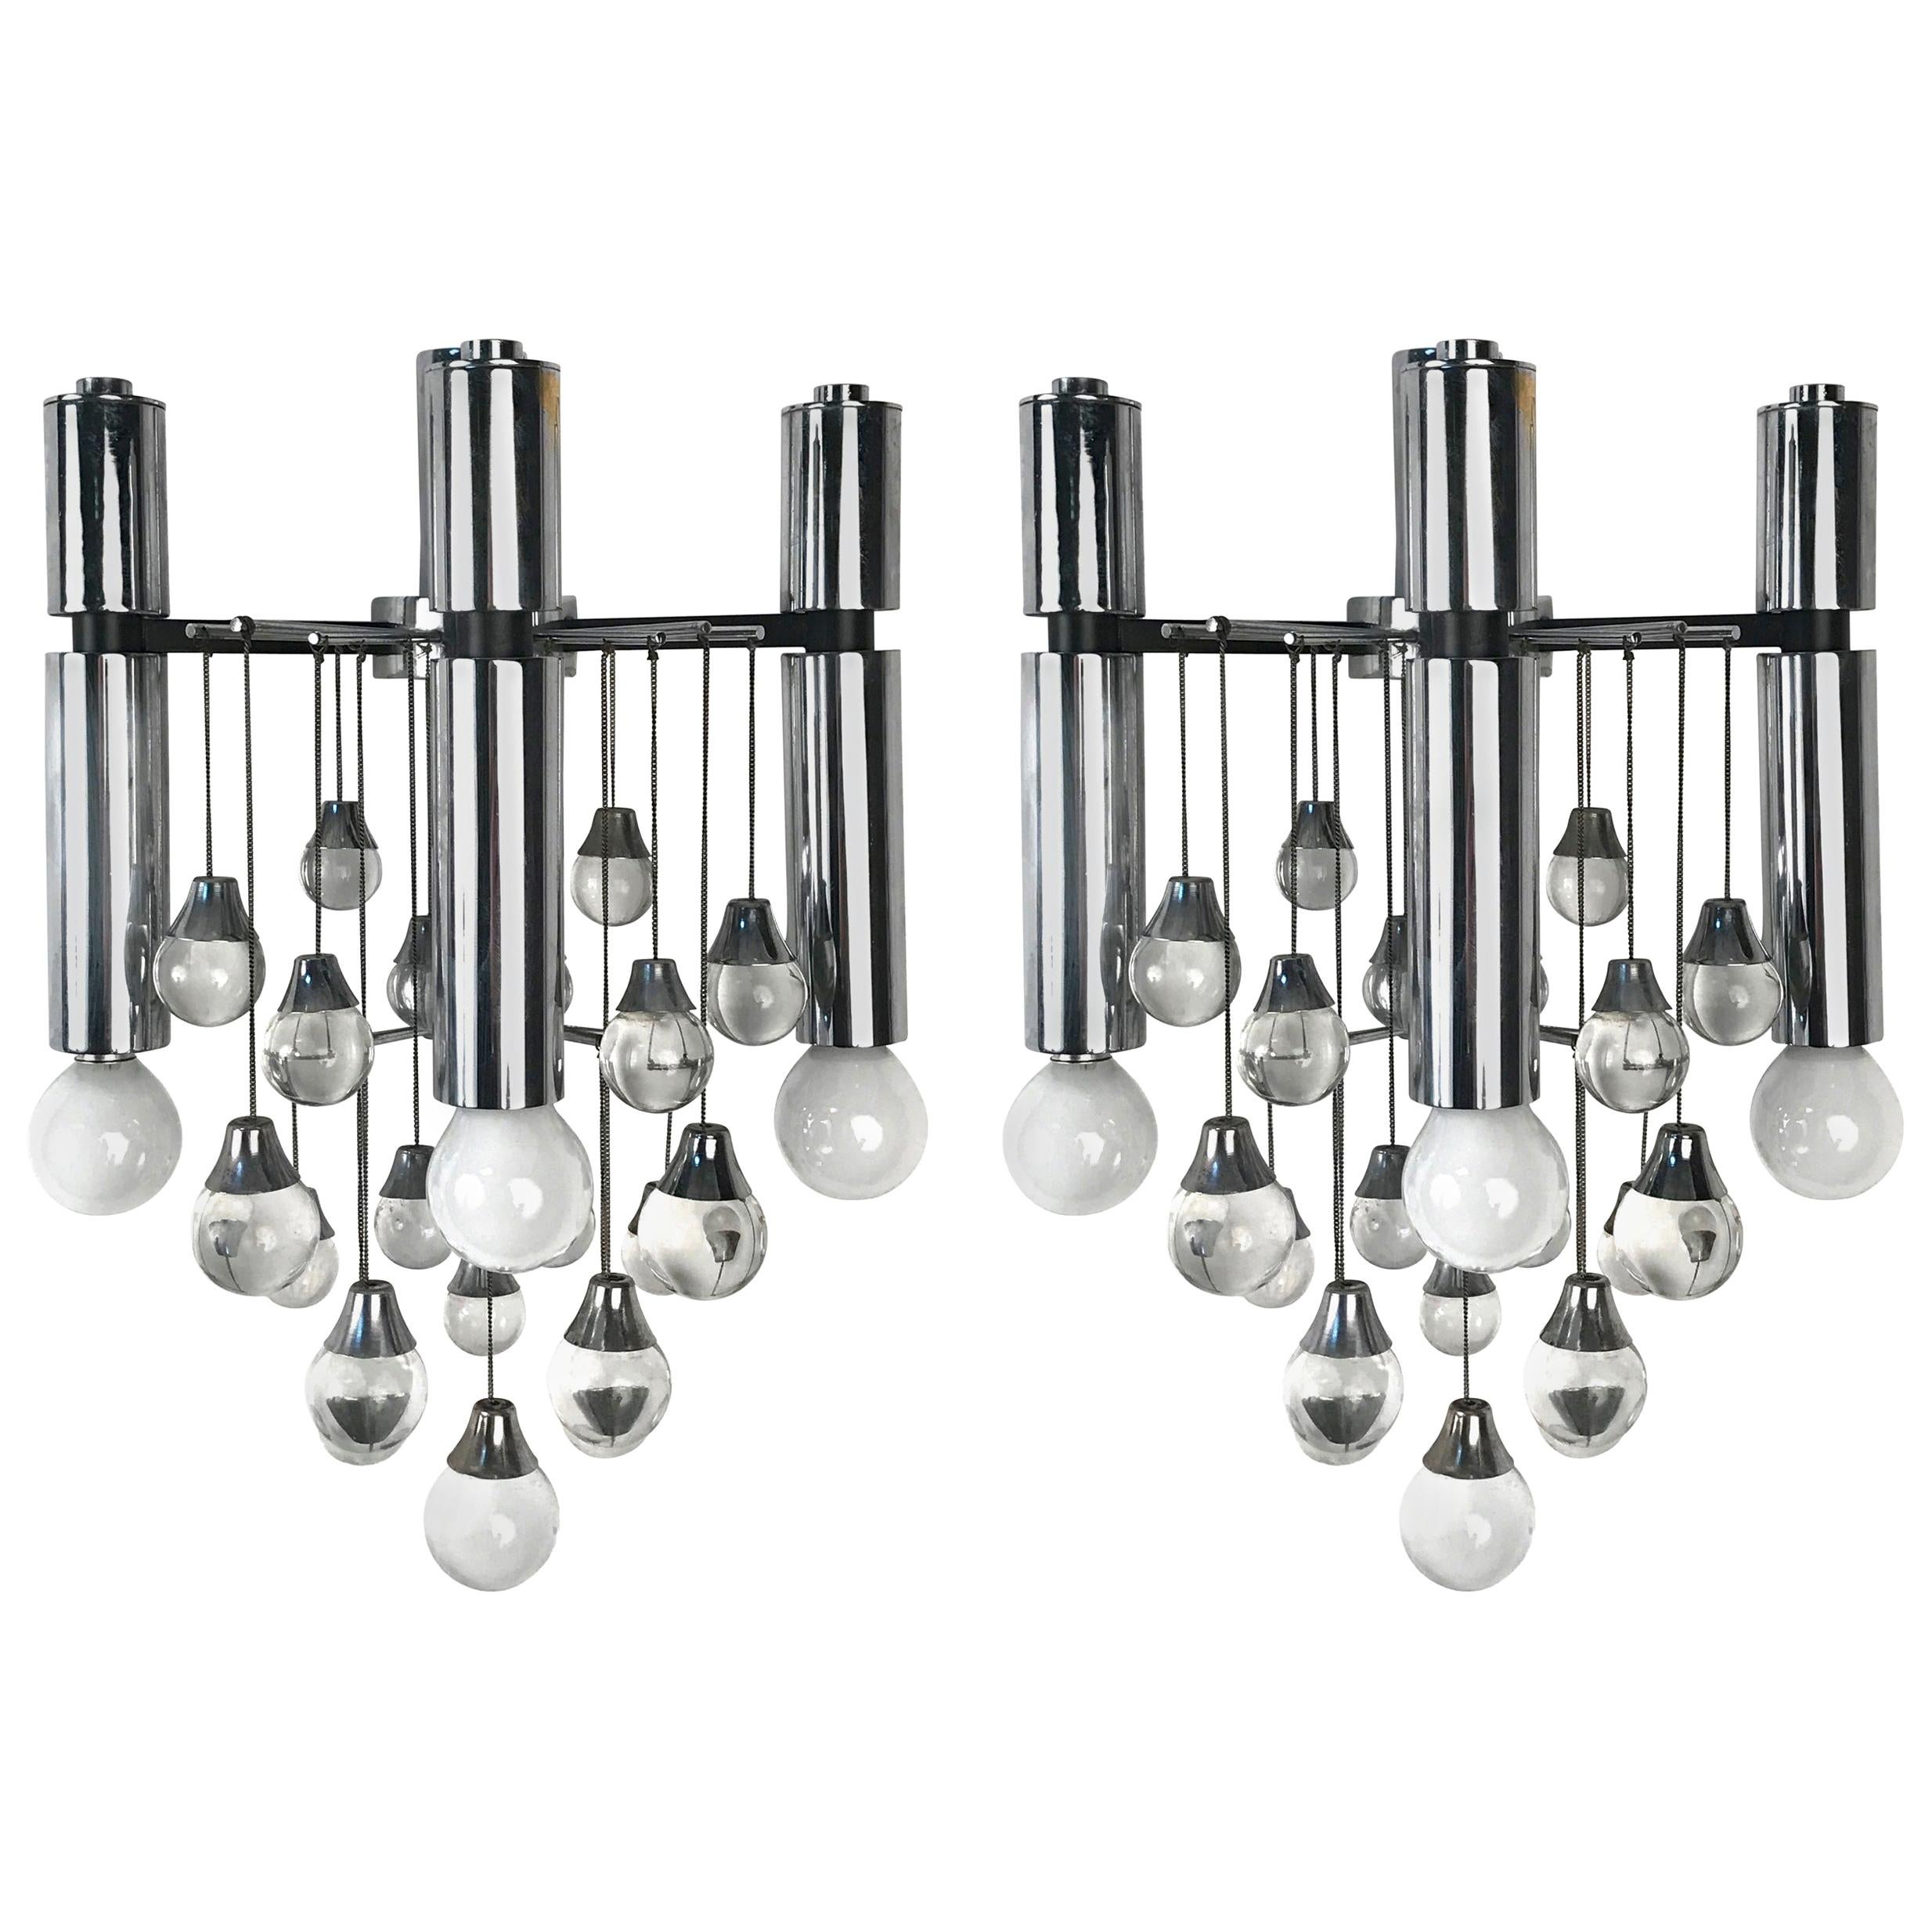 Pair of Sciolari Chrome and Glass Italian Sconces with Three Lights, 1960s For Sale